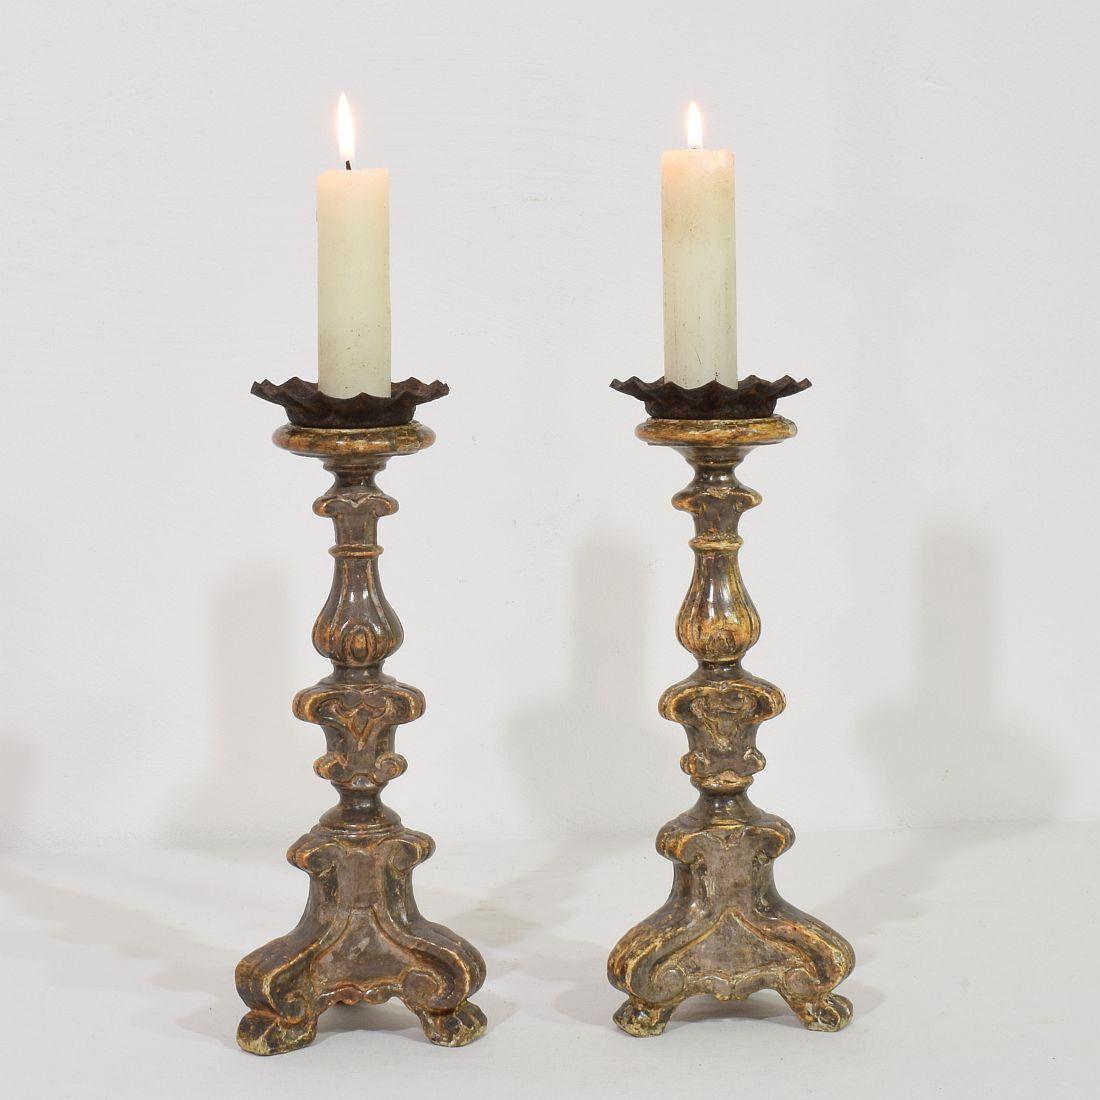 Great pair of carved wooden candleholders with their beautiful weathered silver leaf,
Italy, circa 1750-1800.
Weathered and small losses.